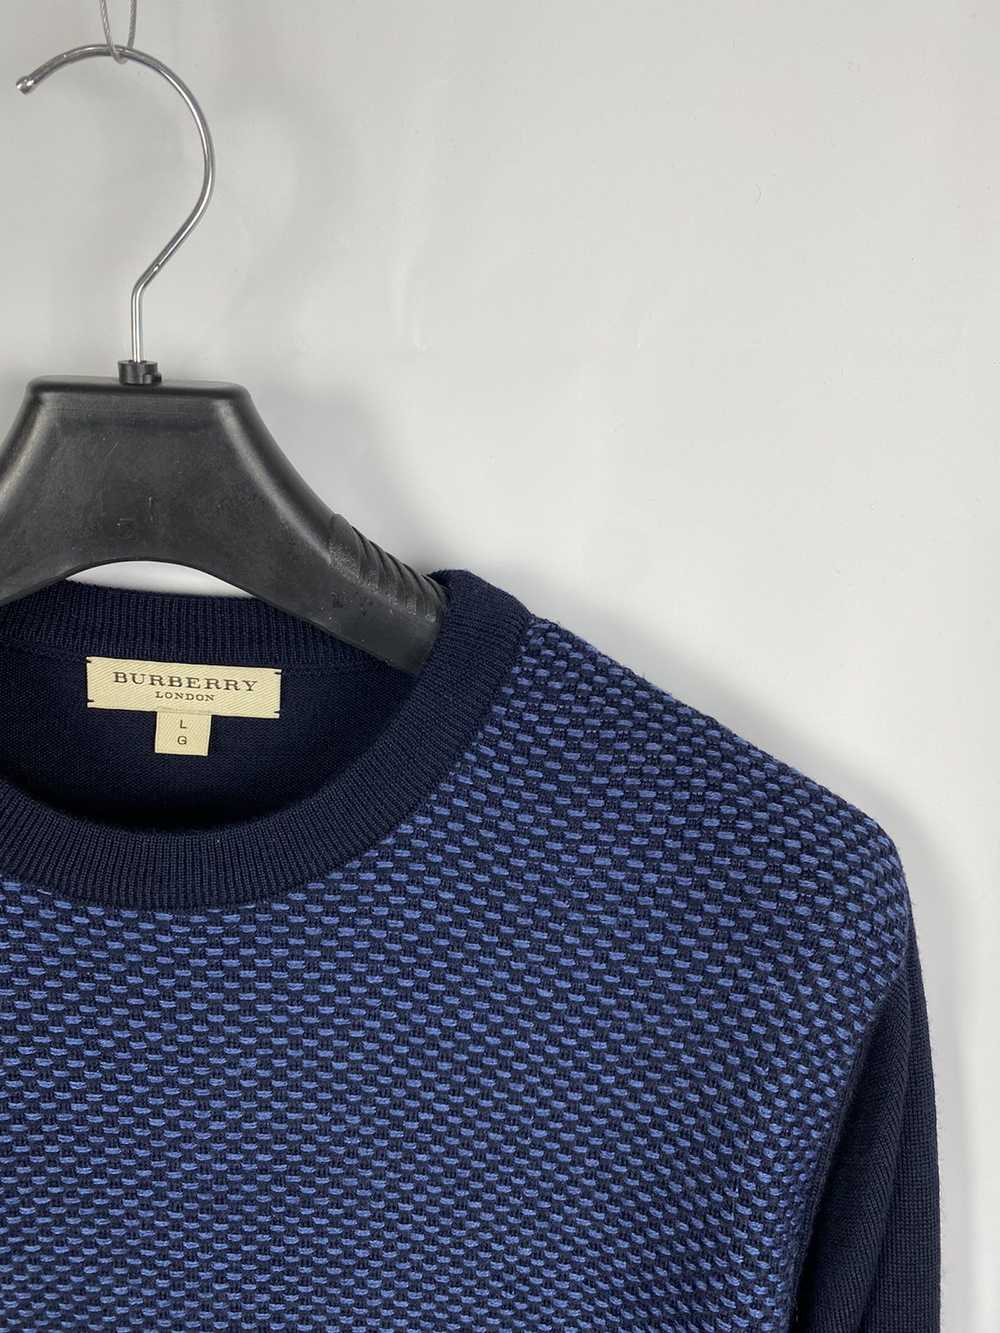 Burberry Burberry London Wool Knit Blue Sweater s… - image 2